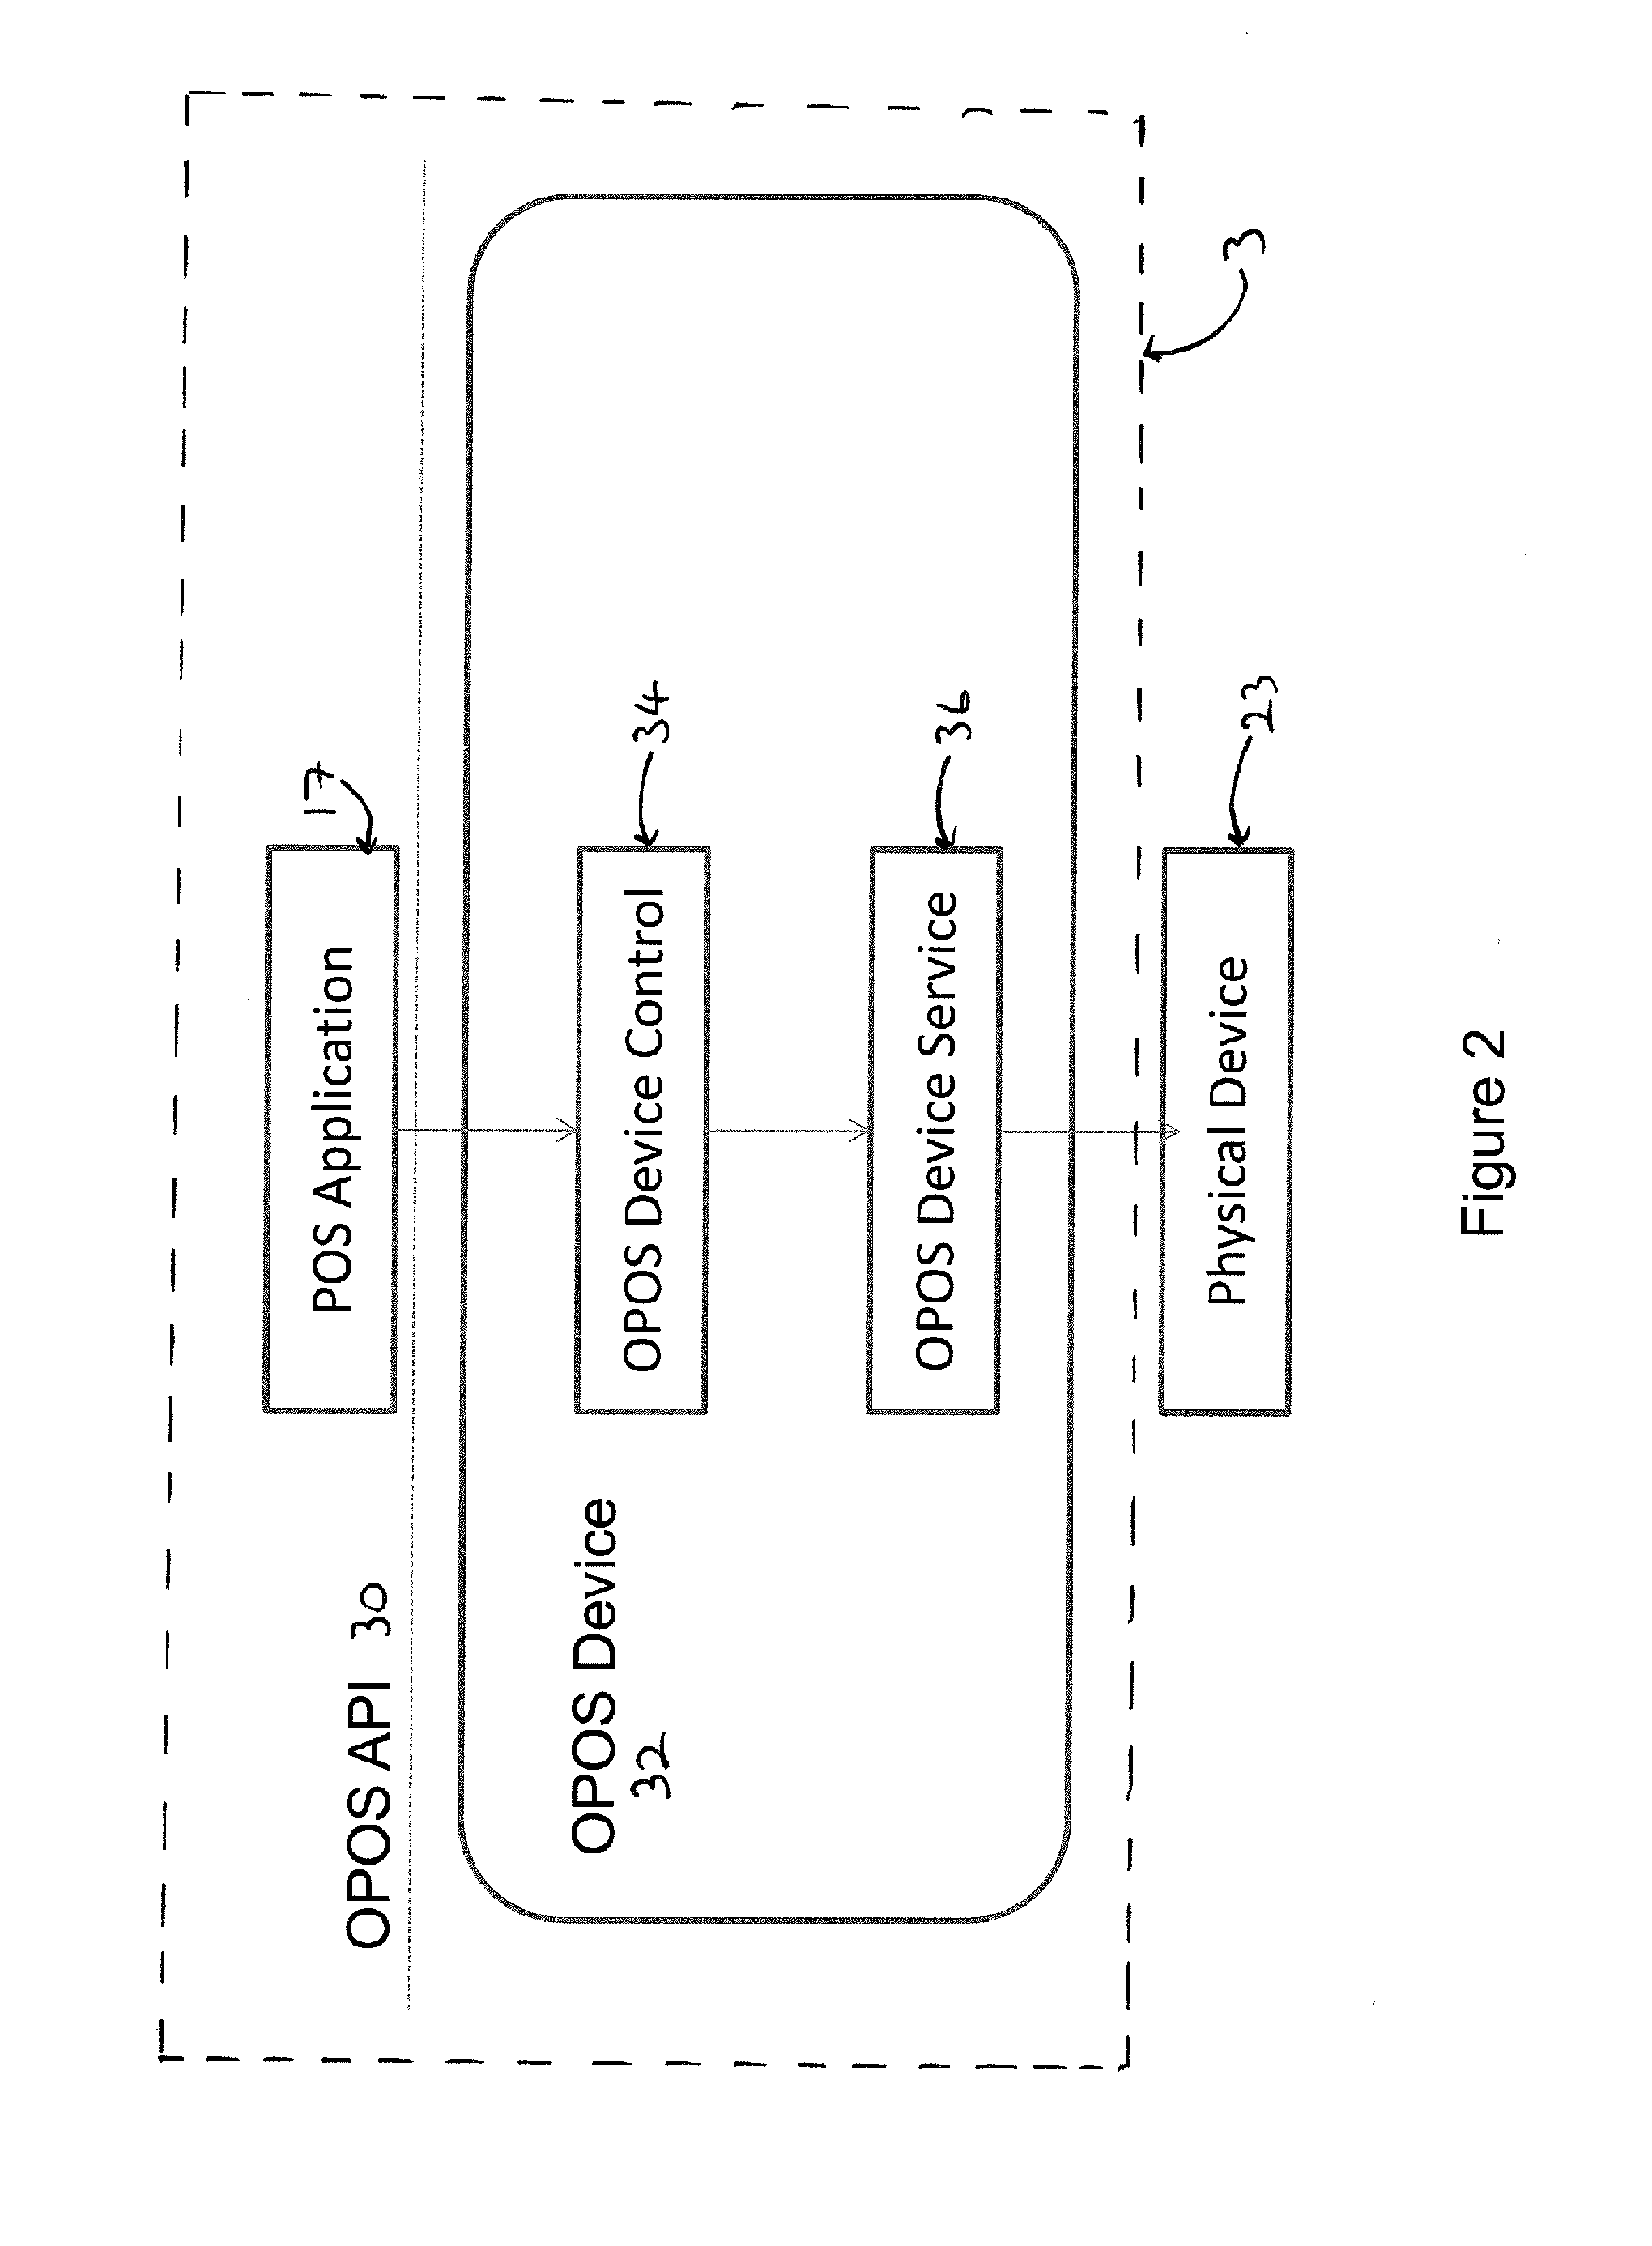 Method of enhancing point-of-sale systems